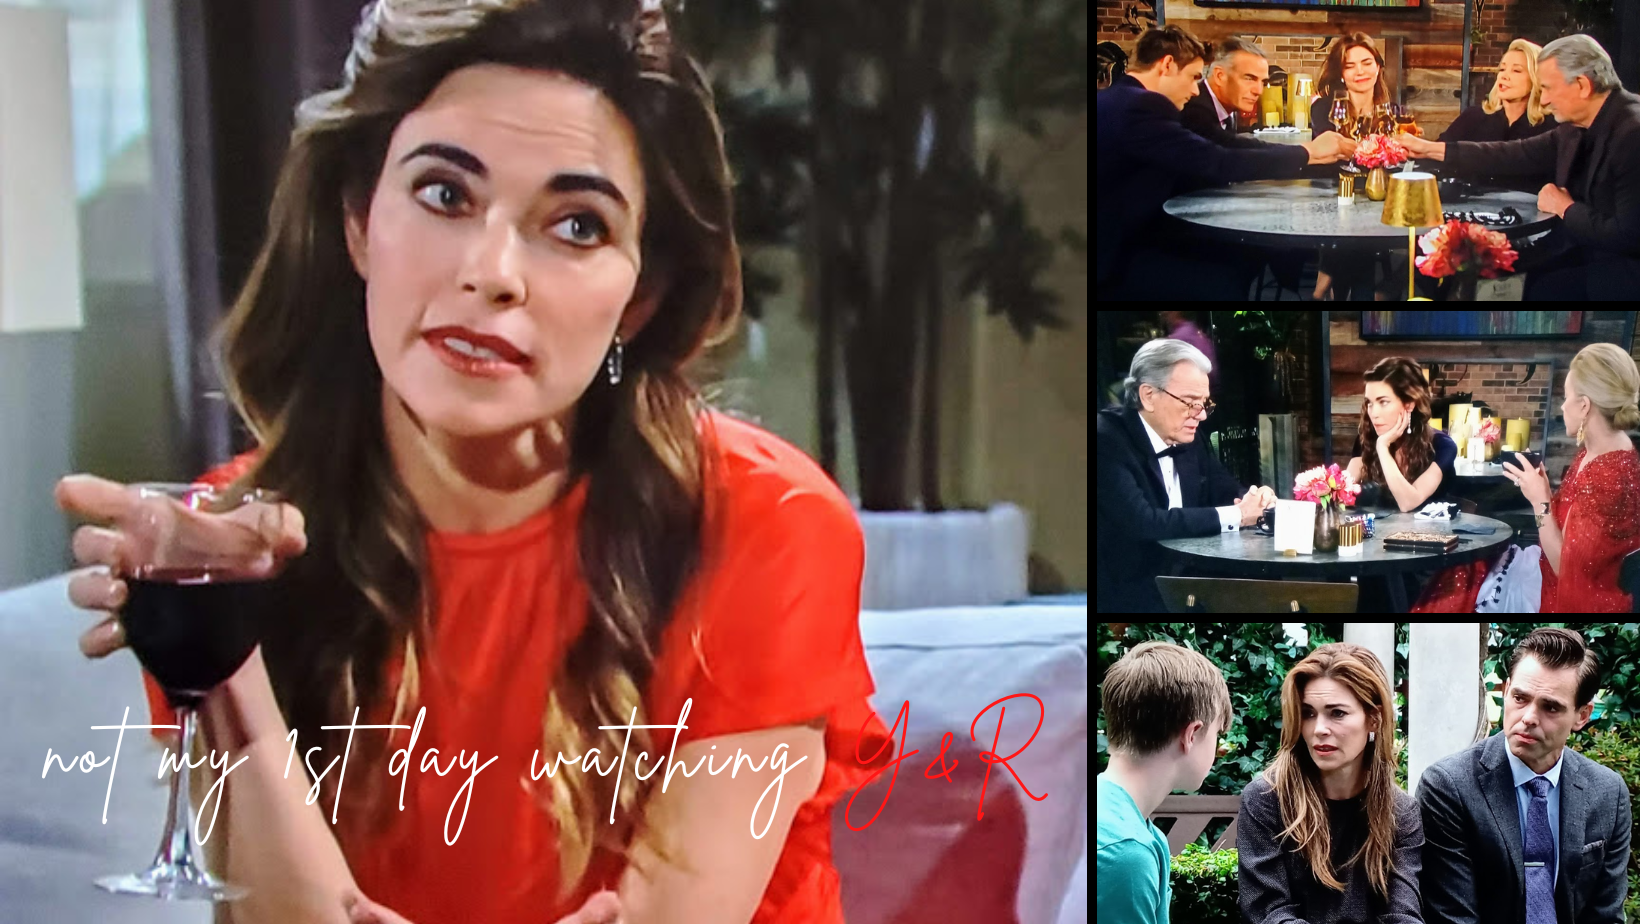 Y&R: Victoria Newman’s Family 1st, Except When It’s Not